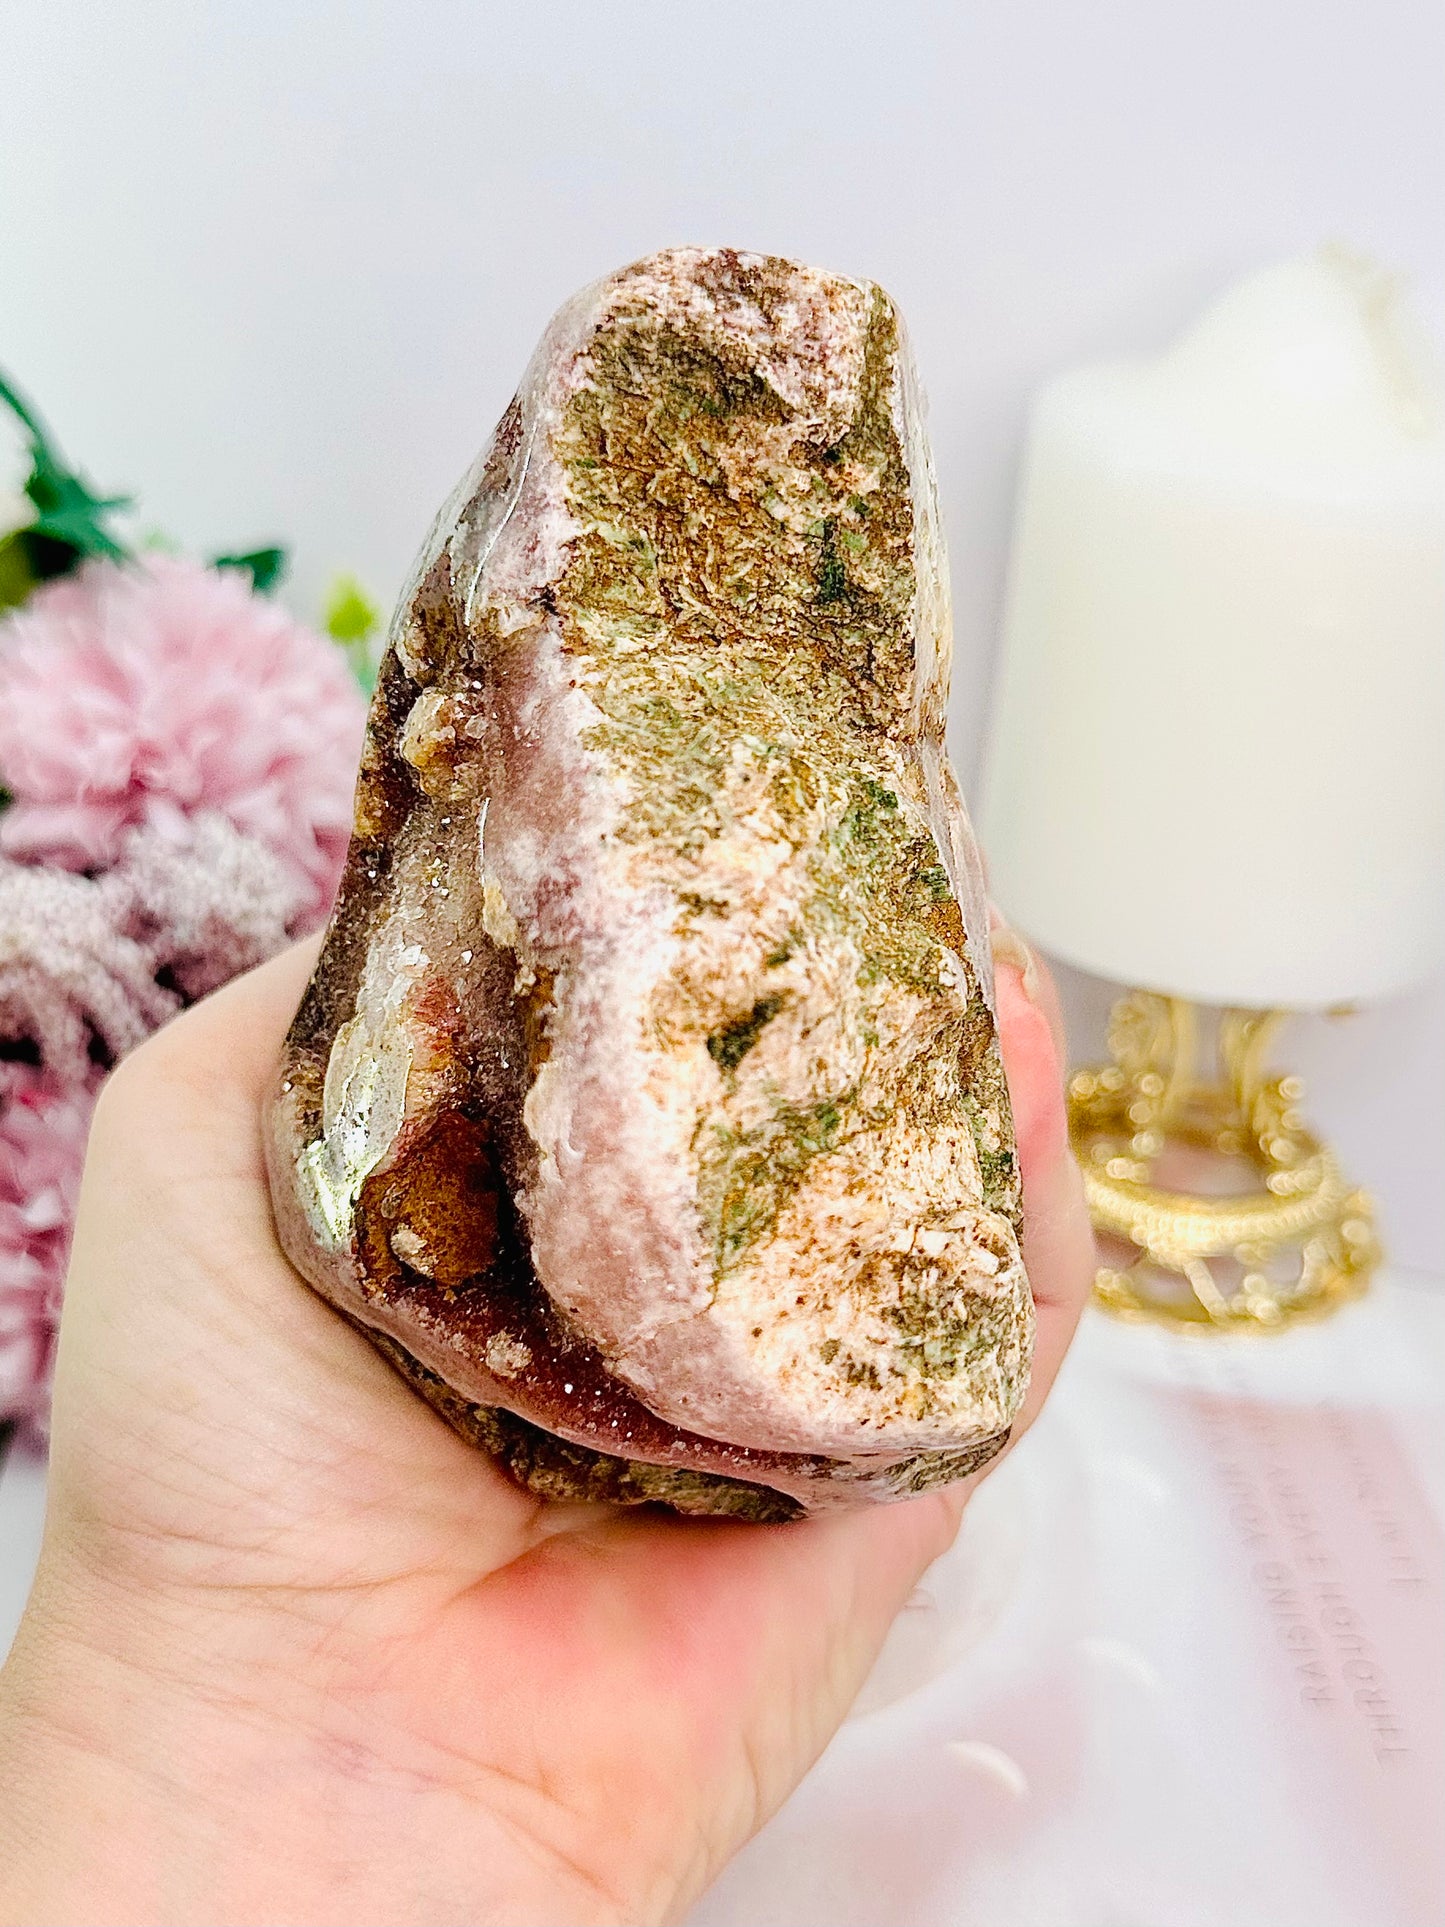 Calming & Cleansing - Over Half a KG Pink Amethyst Druzy Freeform From Argentina